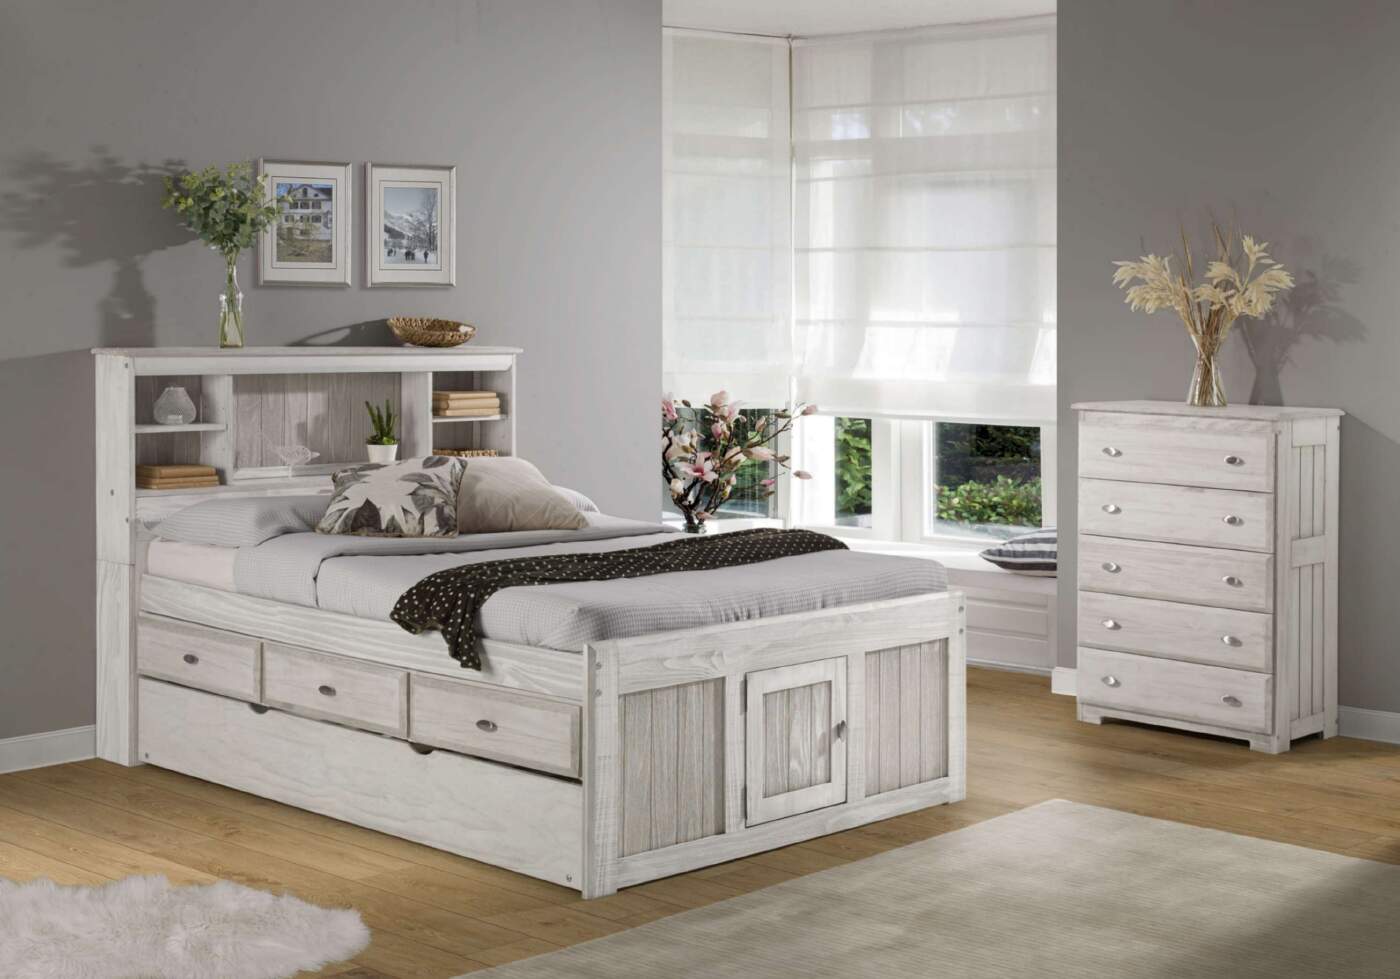 CAPTAINS BEDS & DAY BEDS